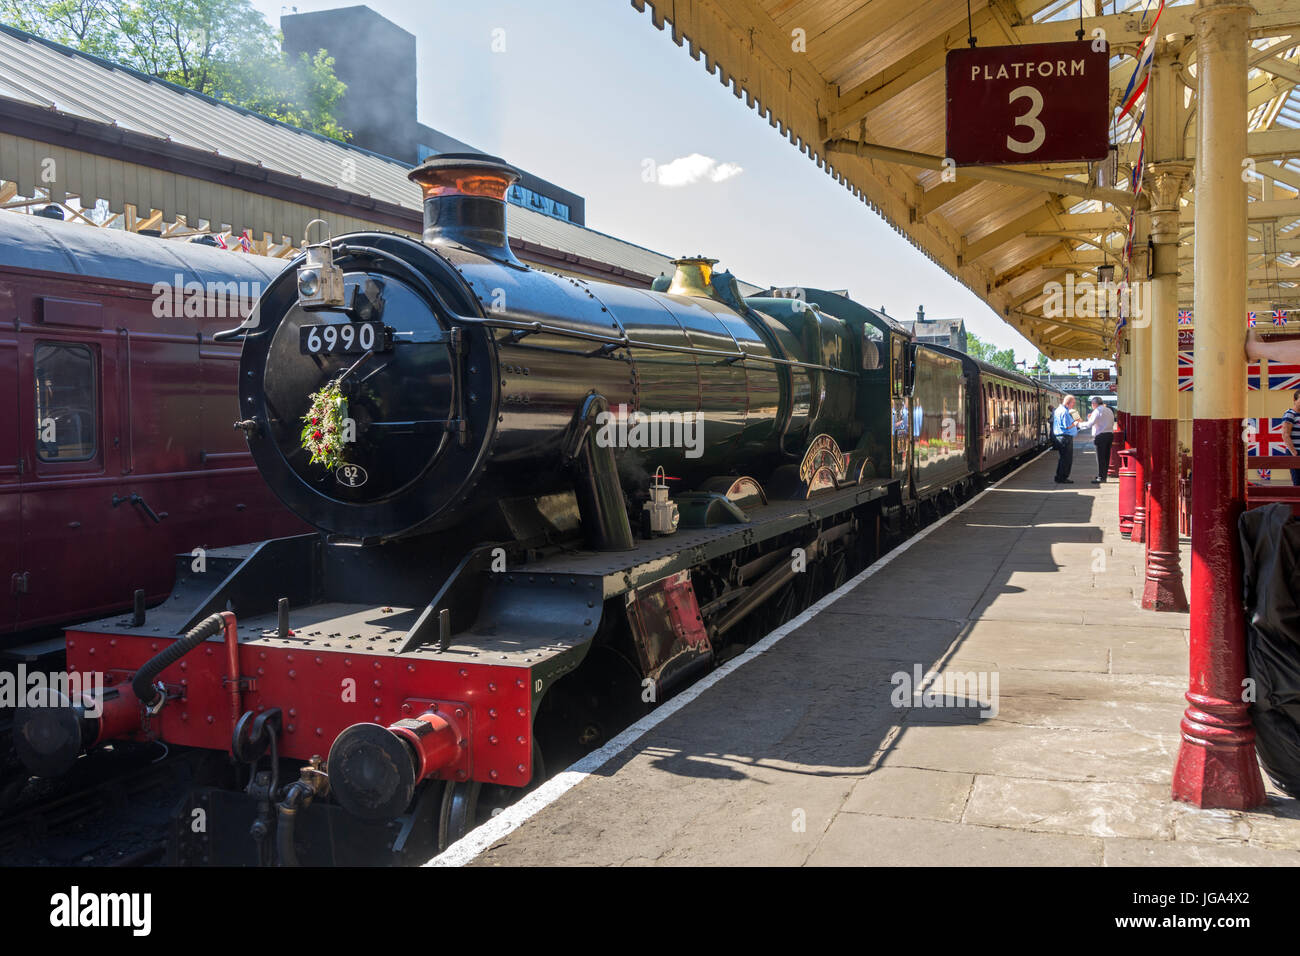 Great Western Railway (GWR) 6959 Class  4-6-0 steam locomotive at Bury station, on the East Lancashire Railway, Bury, Greater Manchester, UK. Stock Photo